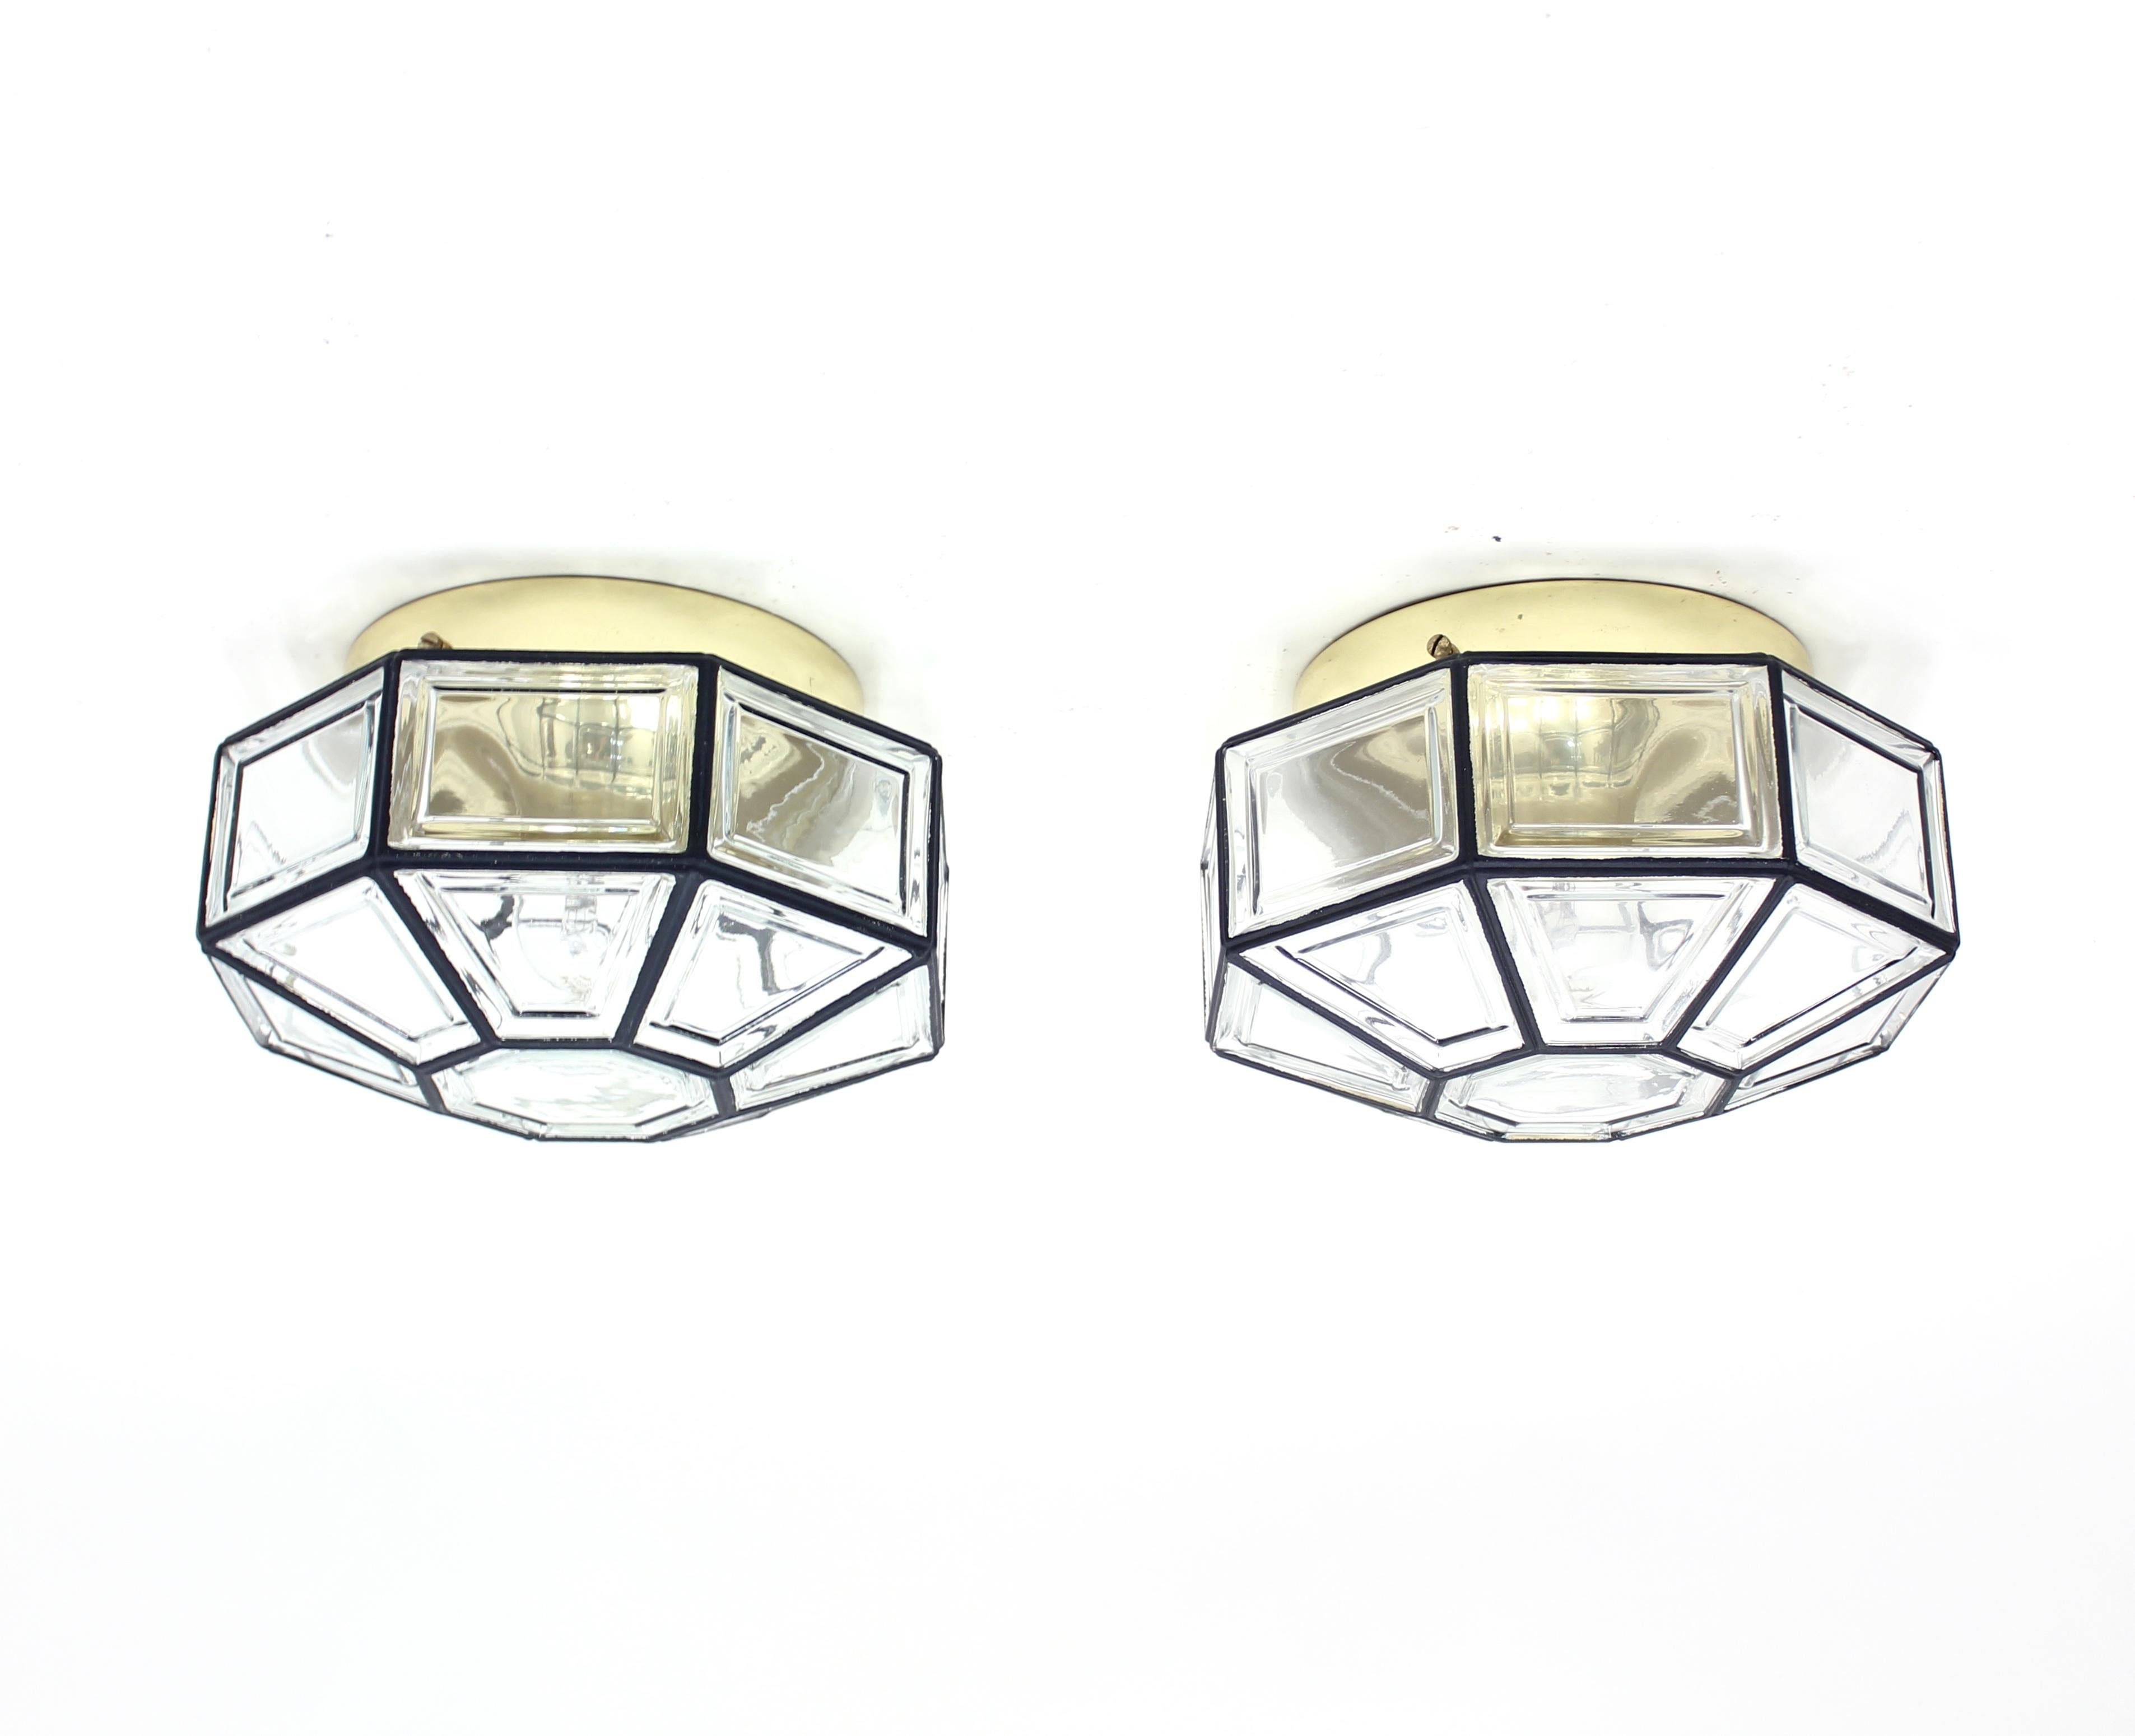 Pair of flush mounted ceiling lamps, model Carat, originally designed by Hans-Agne Jakobsson for his own firm but these examples are made under license by German manufacturer Glashütte Limburg and are made of brass and glass. Works both as a